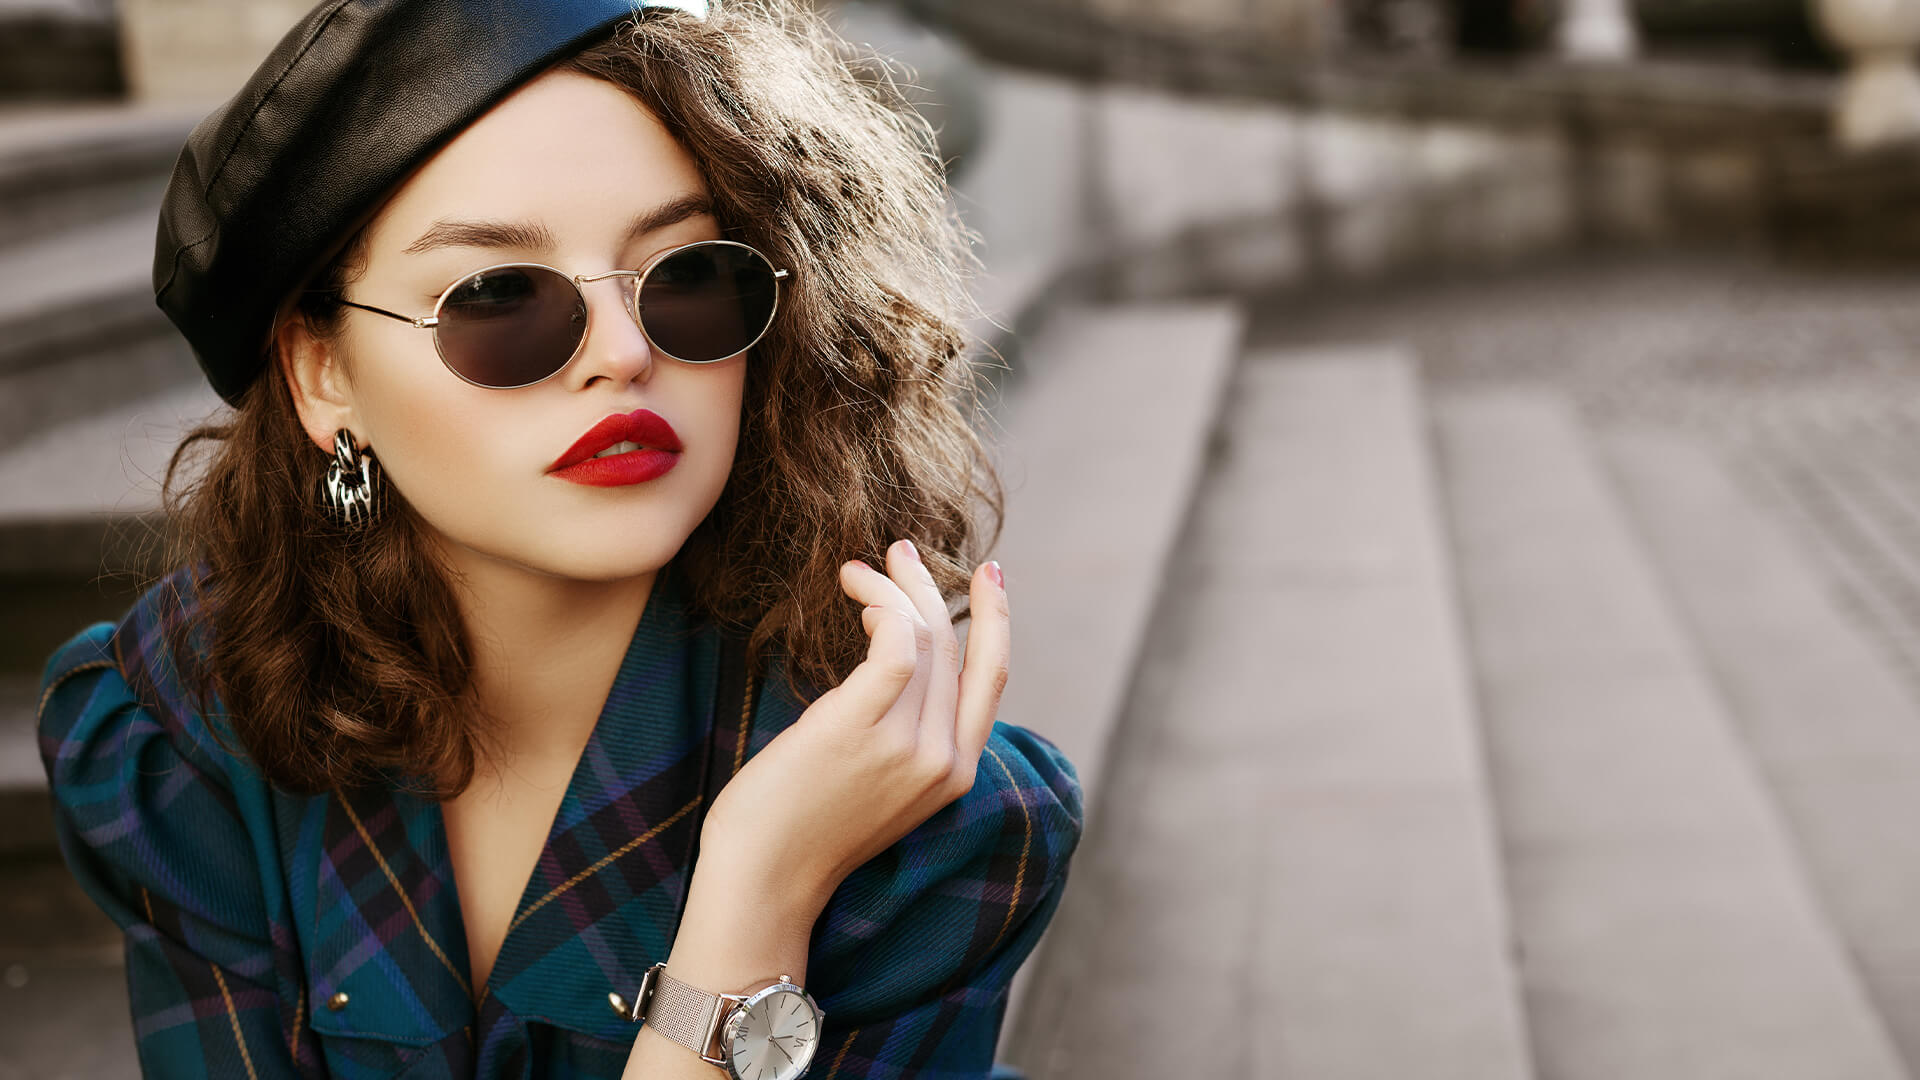 Woman with red lipstick and confident fashion sense in the street